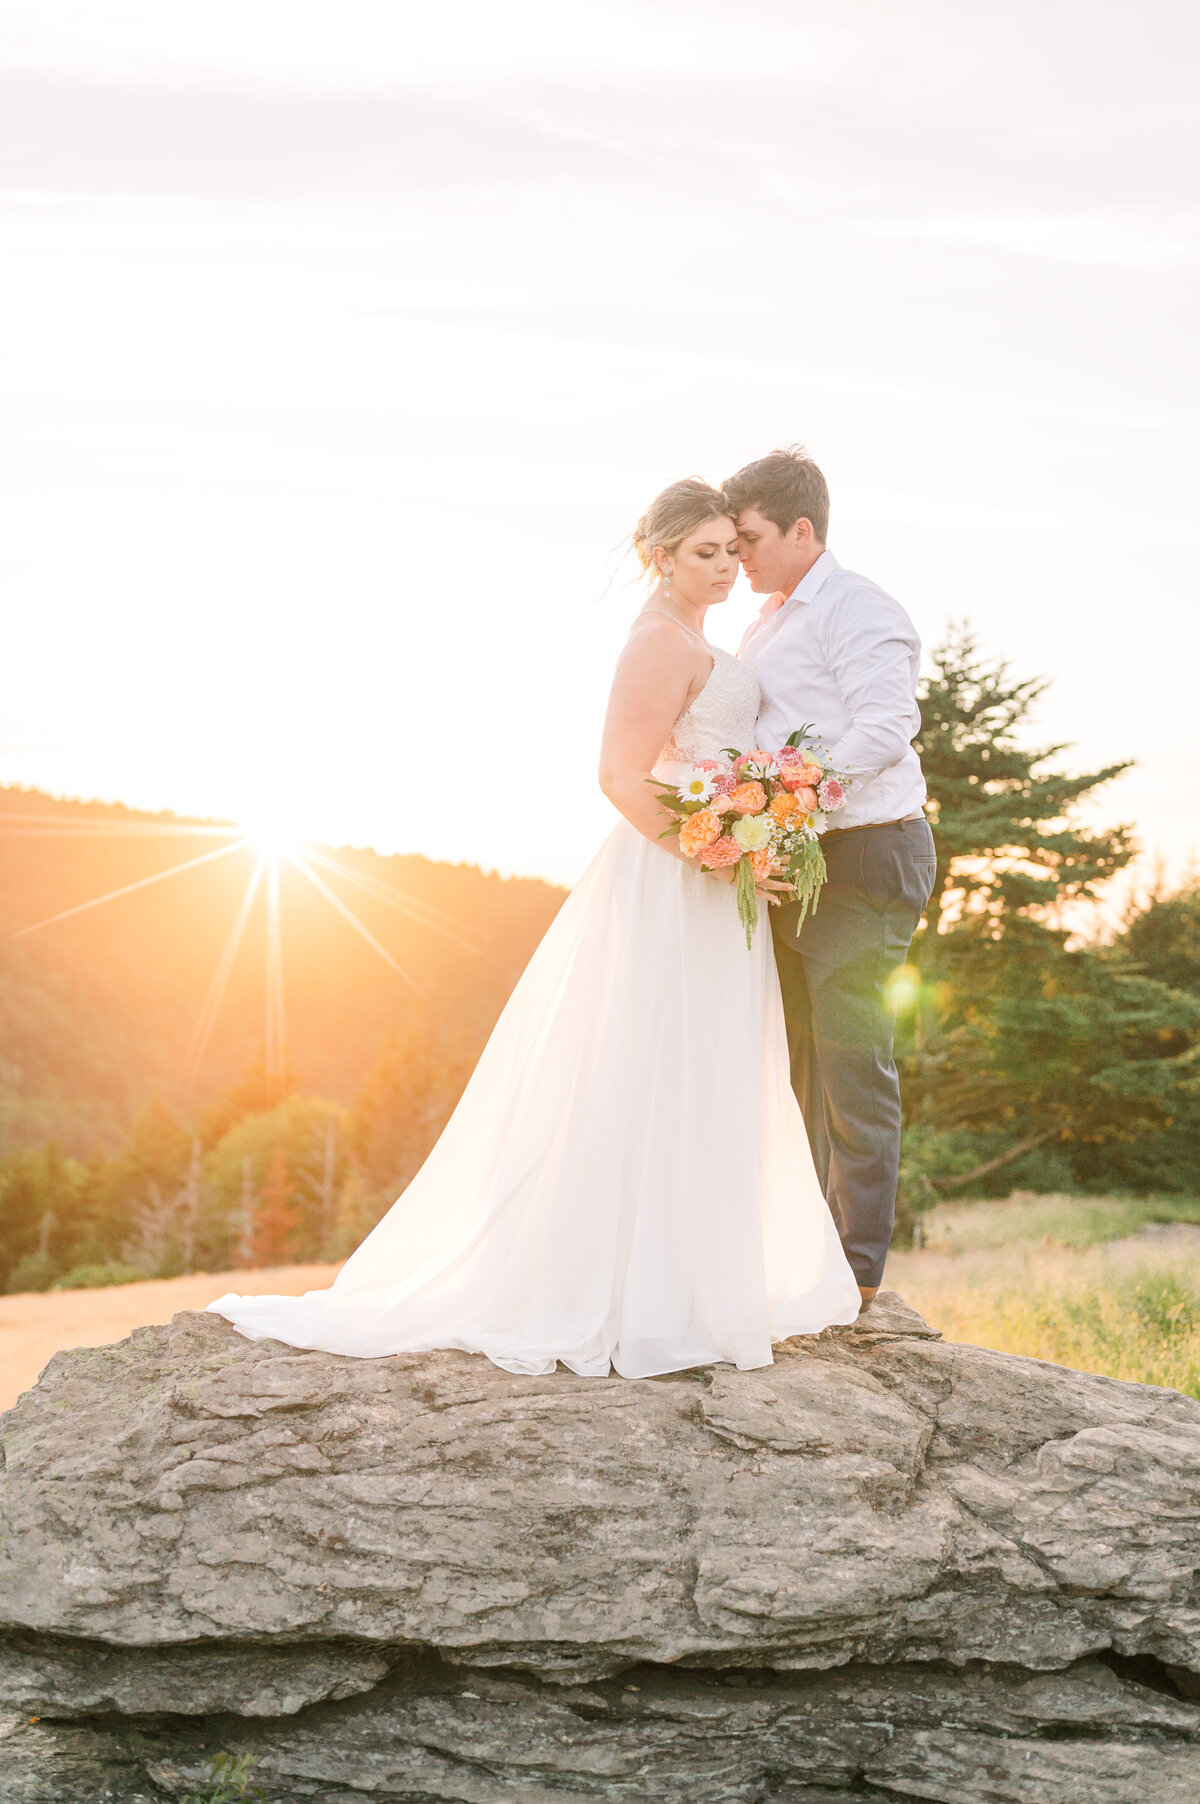 A couple on their elopement at sunset in the Blue Ridge Mountains by JoLynn Photography, a North Carolina wedding photographer